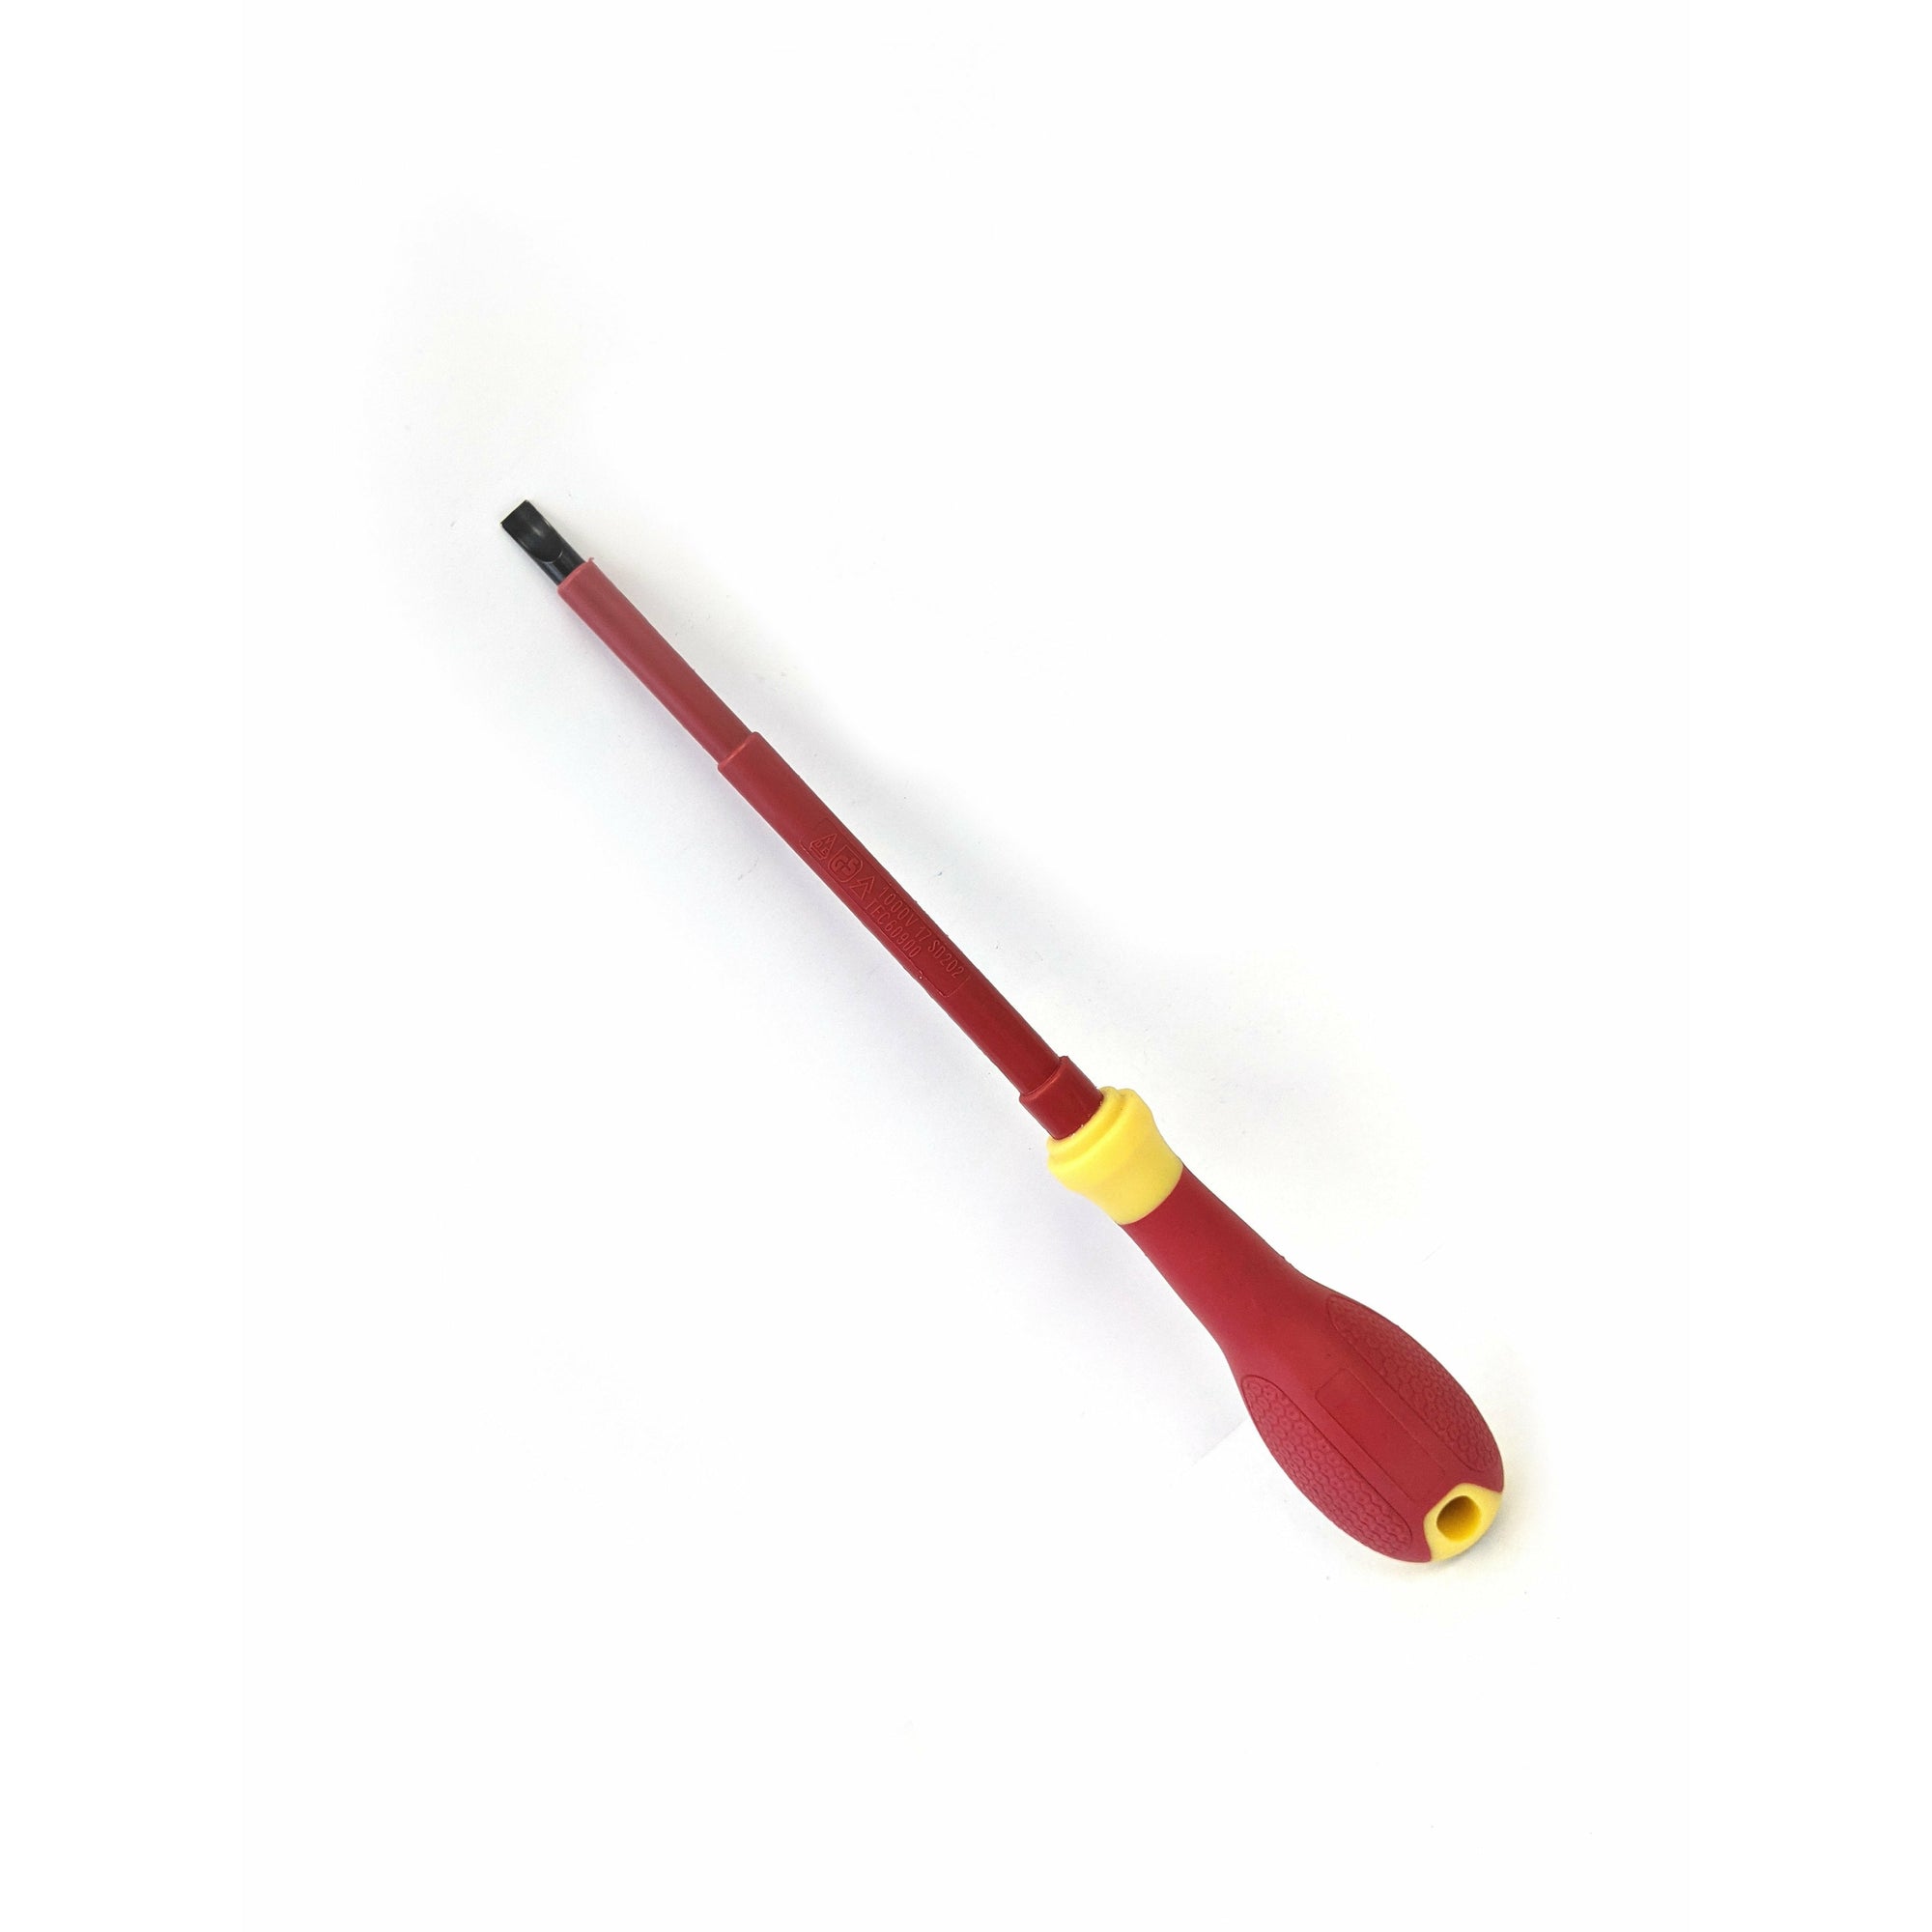 Workpro Vde Insulated Screwdriver 6.5X150Mm